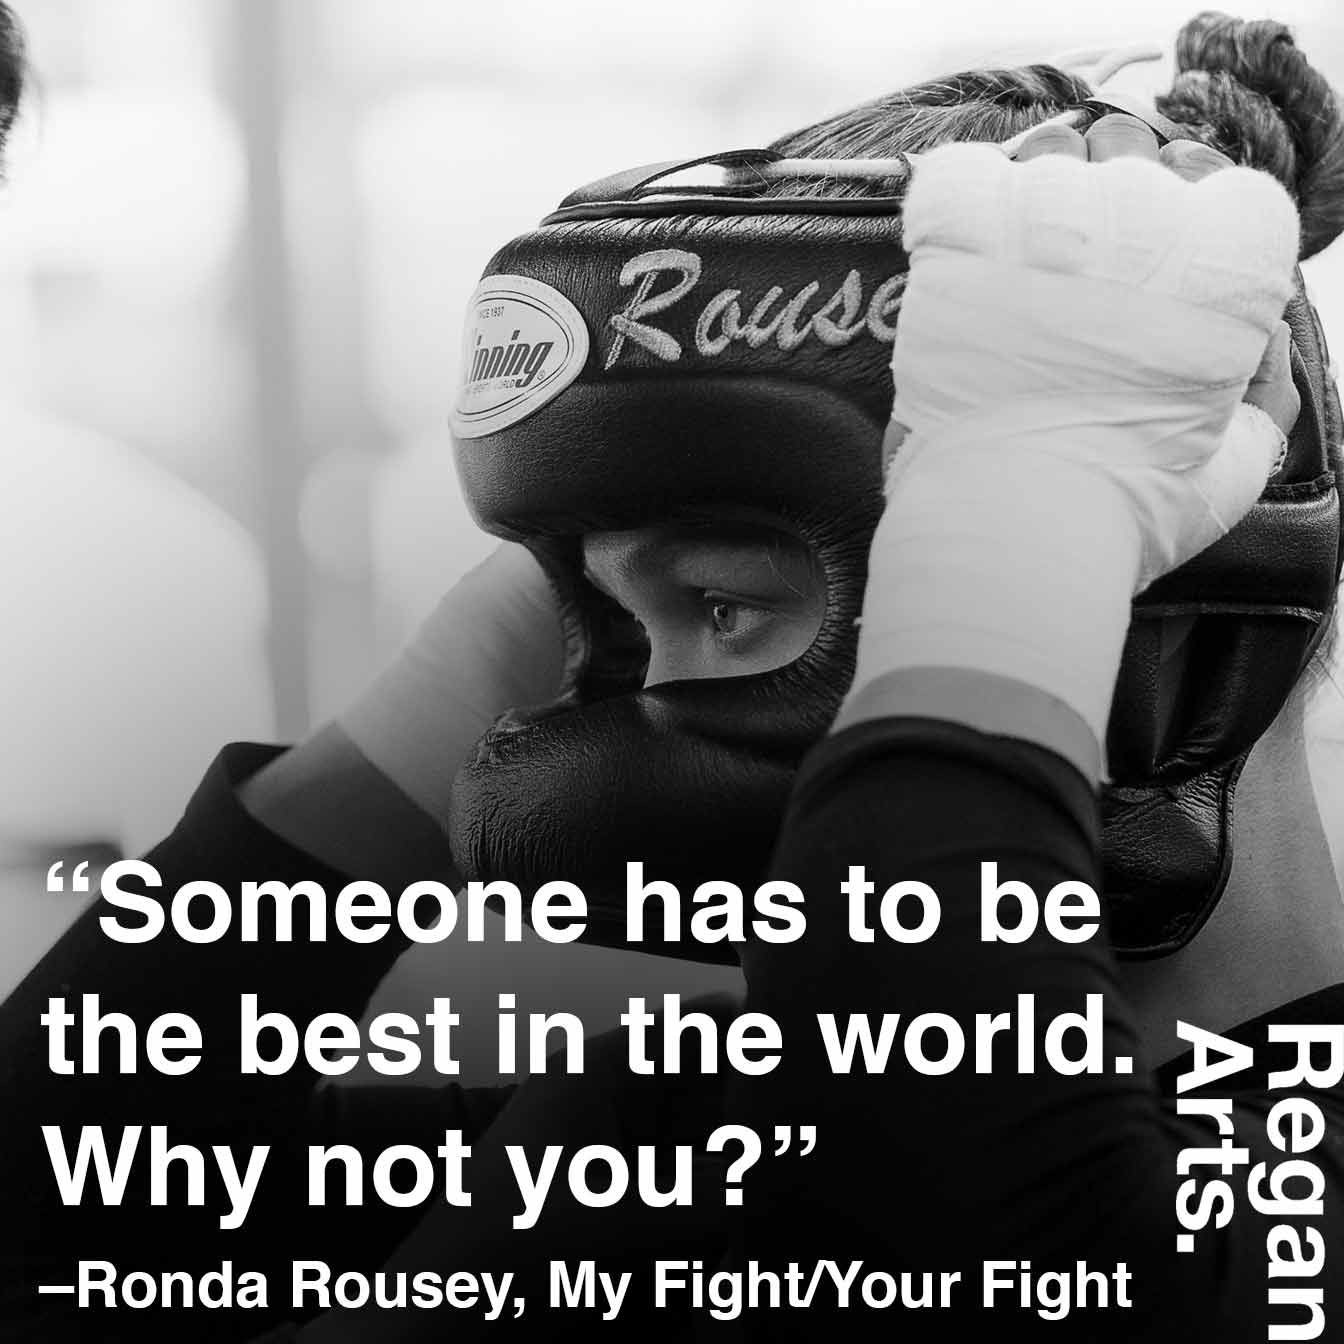 Ronda Rousey Motivational Quotes
 "Someone has to be the best in the world Why not you